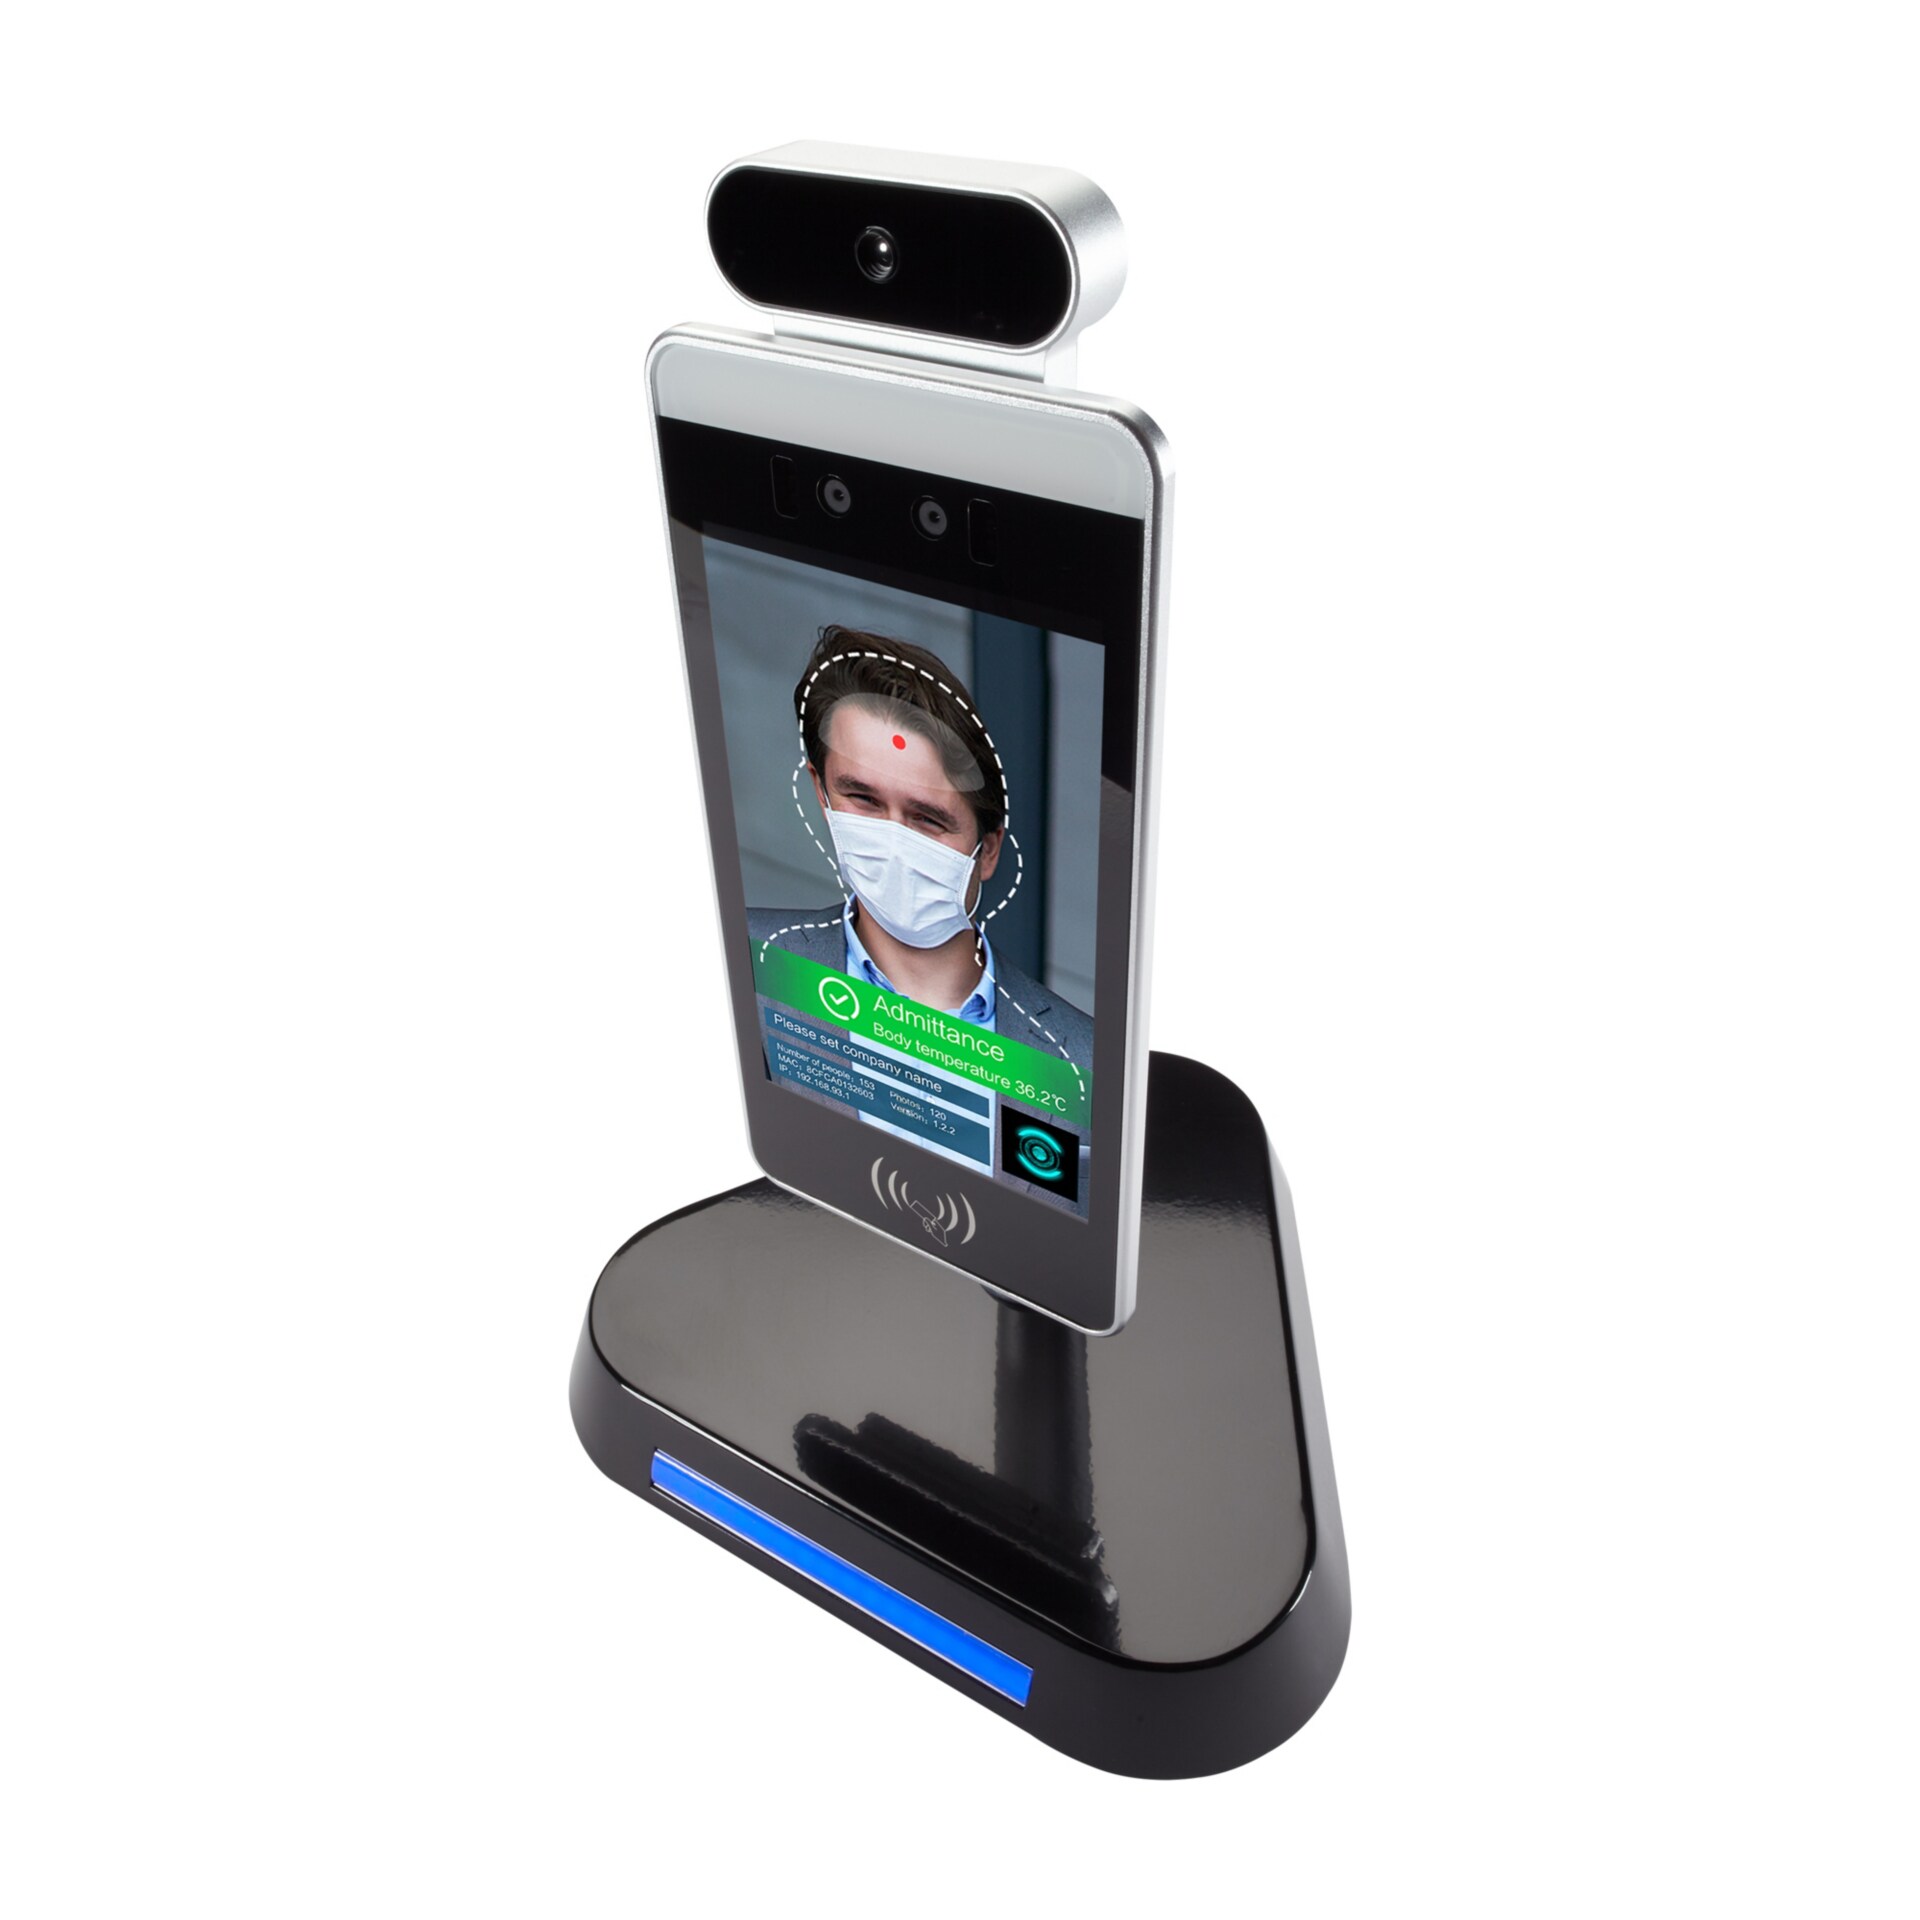 Shop Temperature Screening Kiosk with Facial Recognition